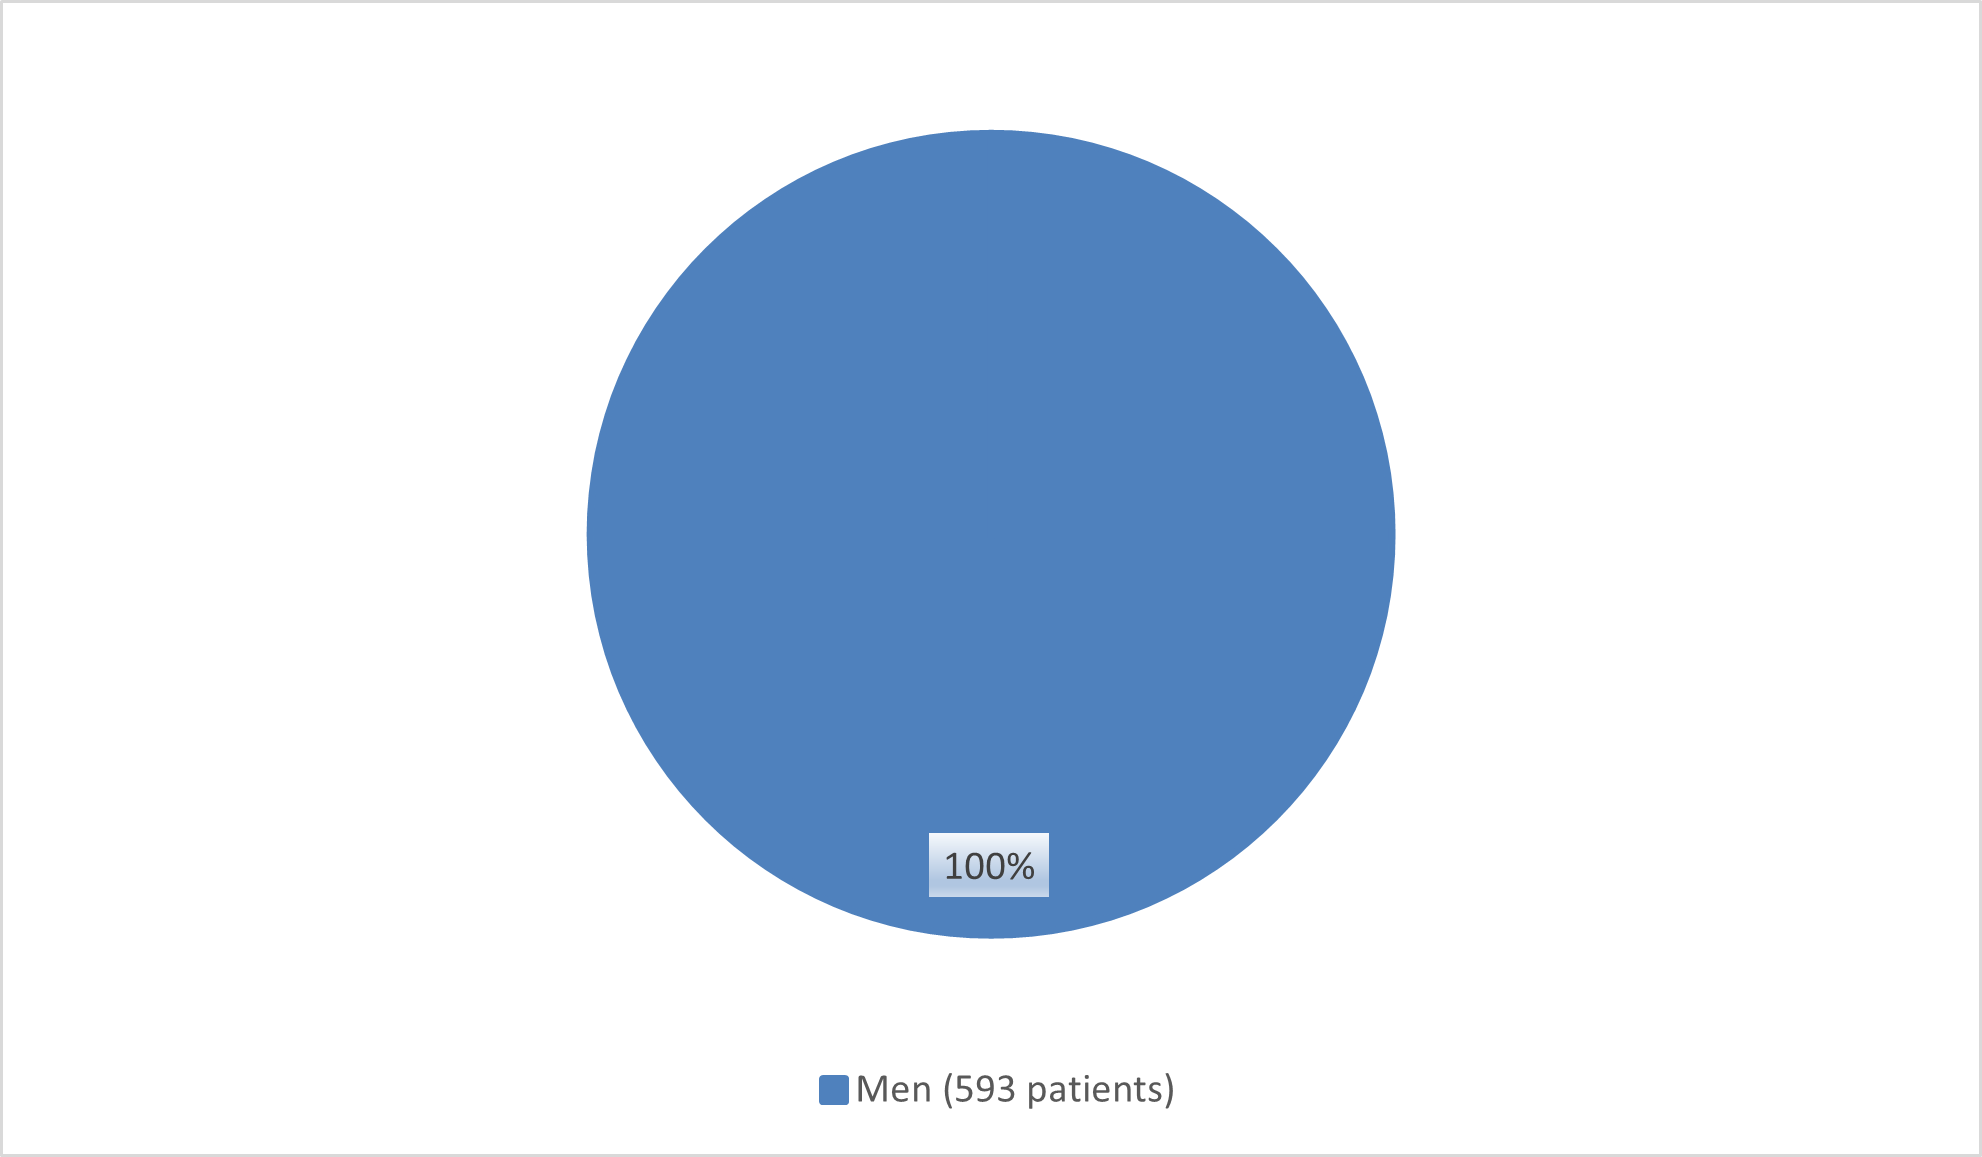 Pie chart summarizing how many men and women were in the clinical trial. In total, 593 (100%) men and 0 (0%) women participated in the clinical trial.